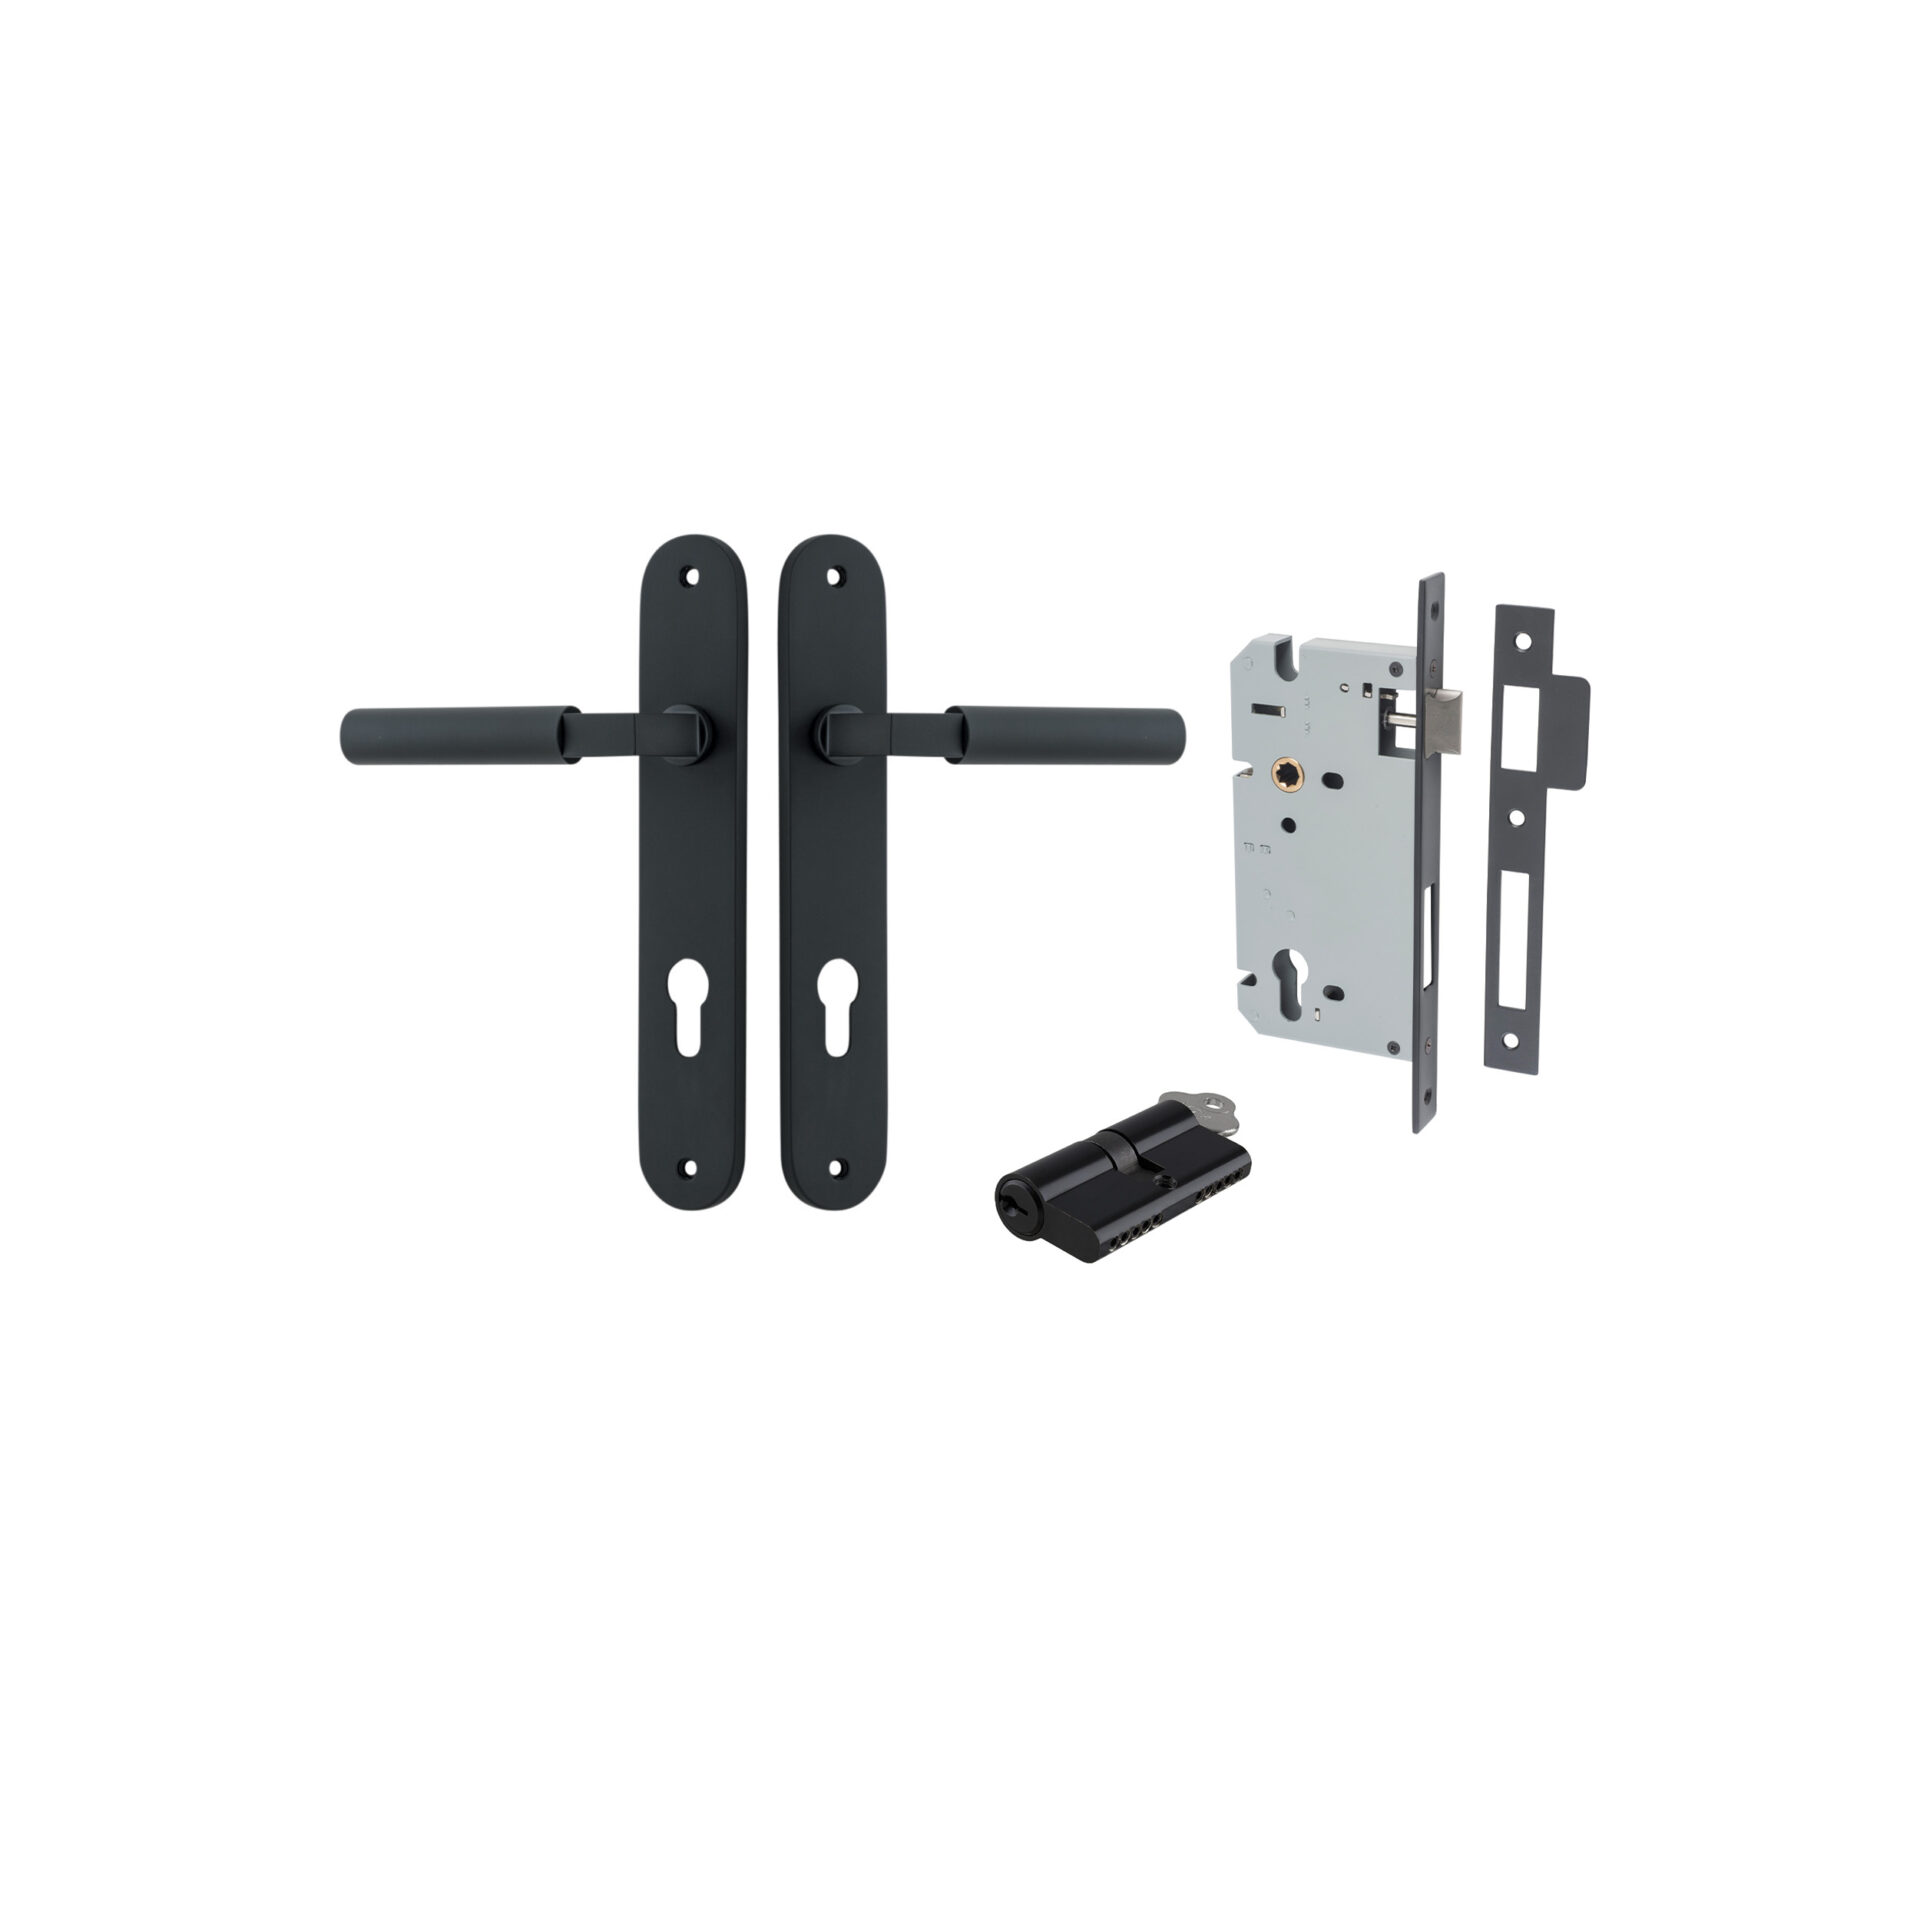 Berlin Lever - Oval Backplate Entrance Kit with High Security Lock